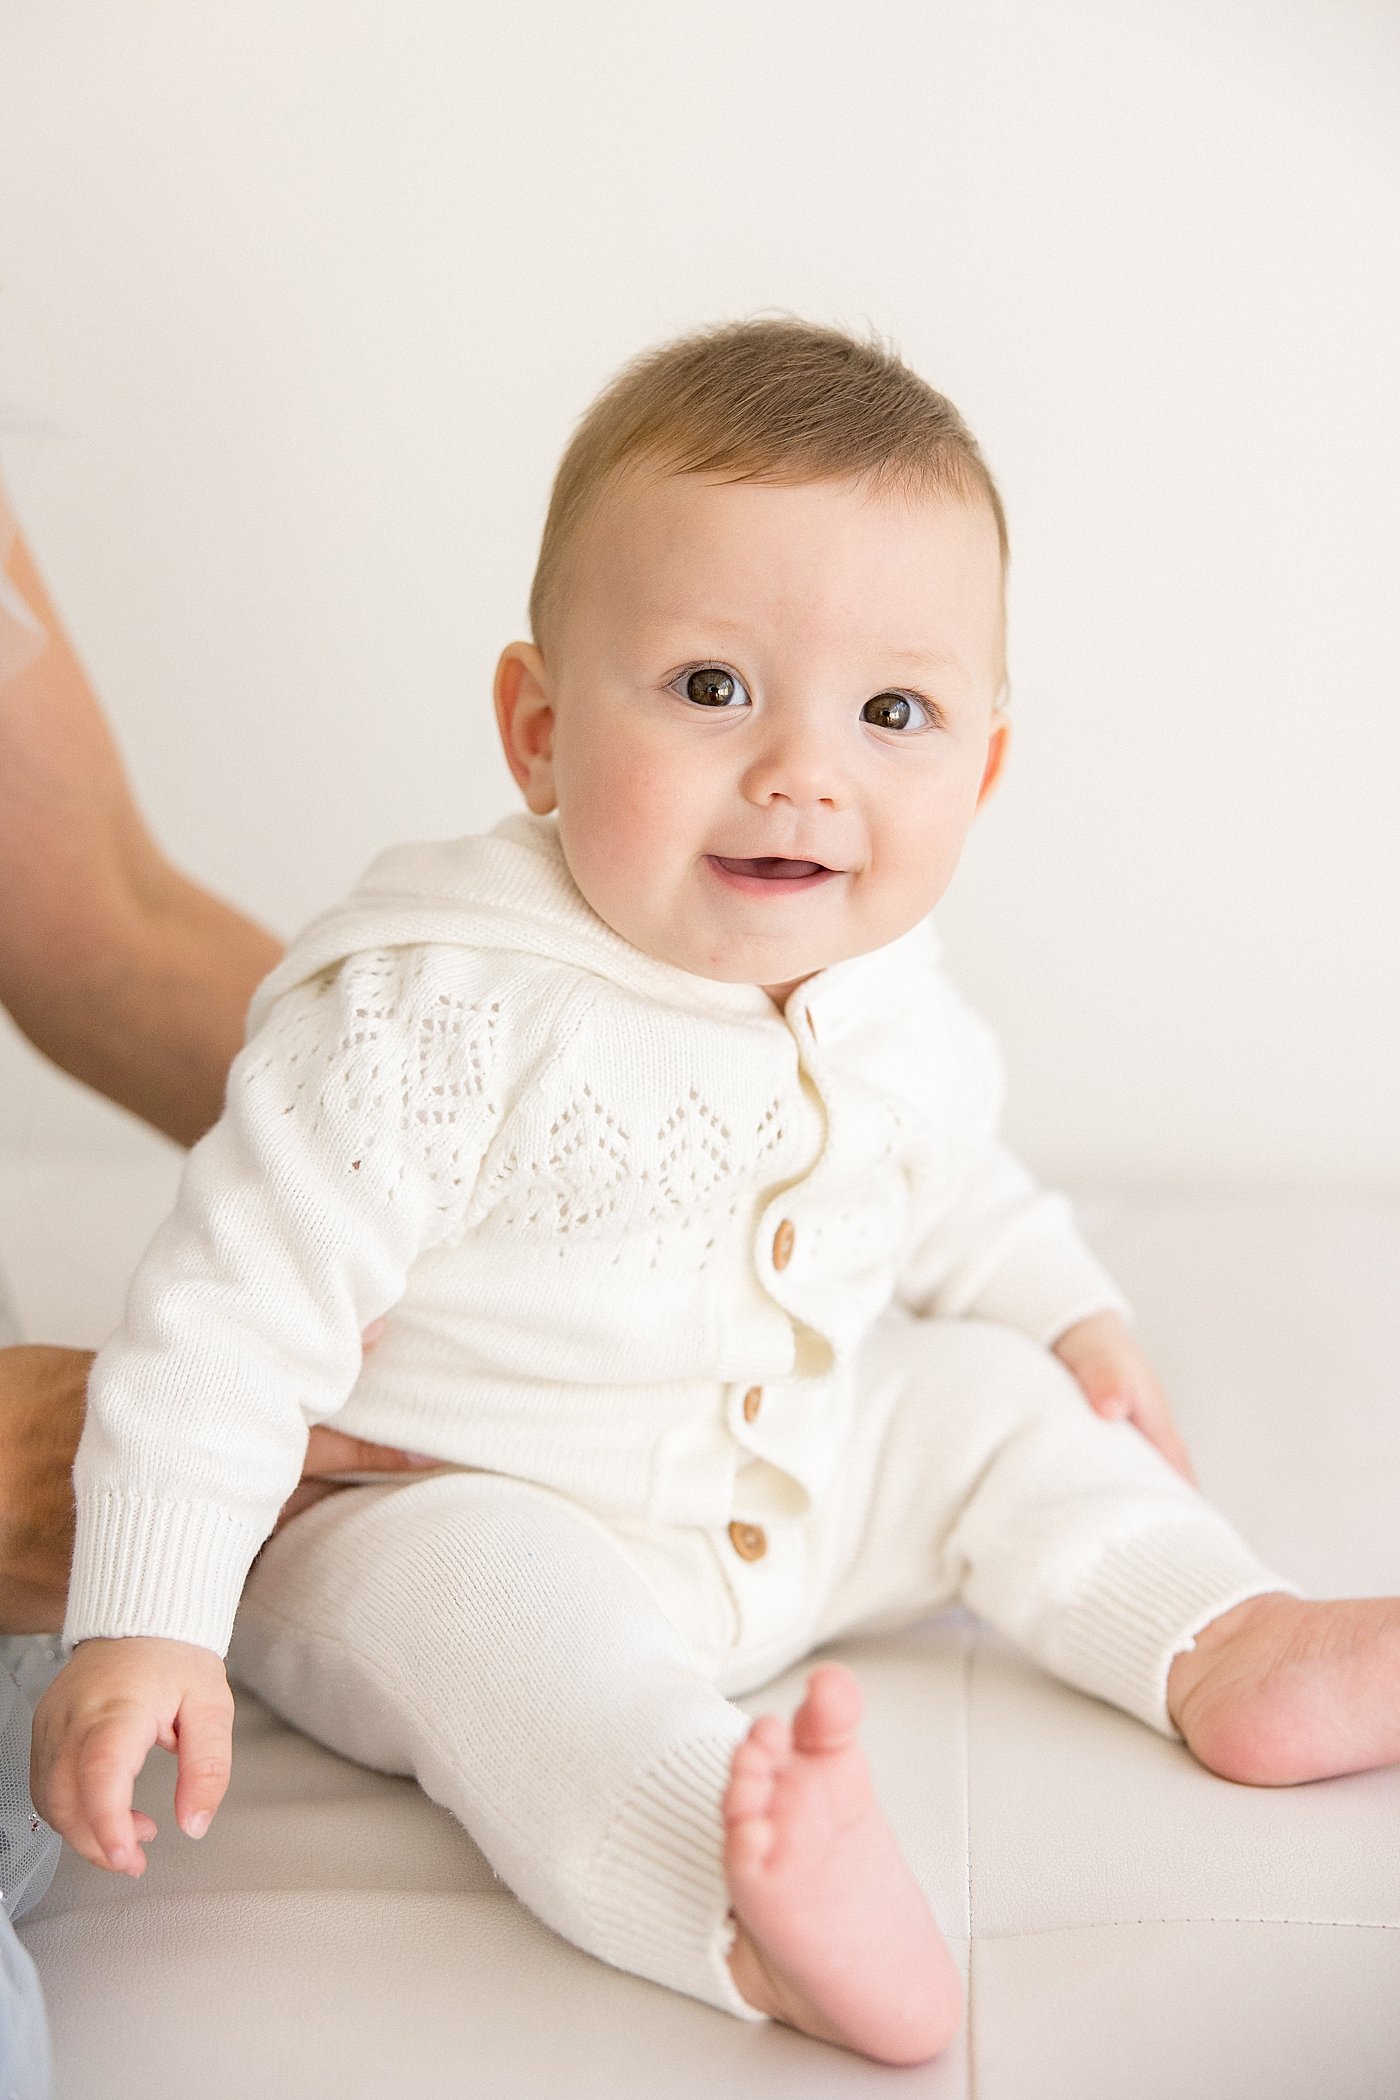 Newport Beach Studio 6 Month Sitter Session | Ambre Williams Photography